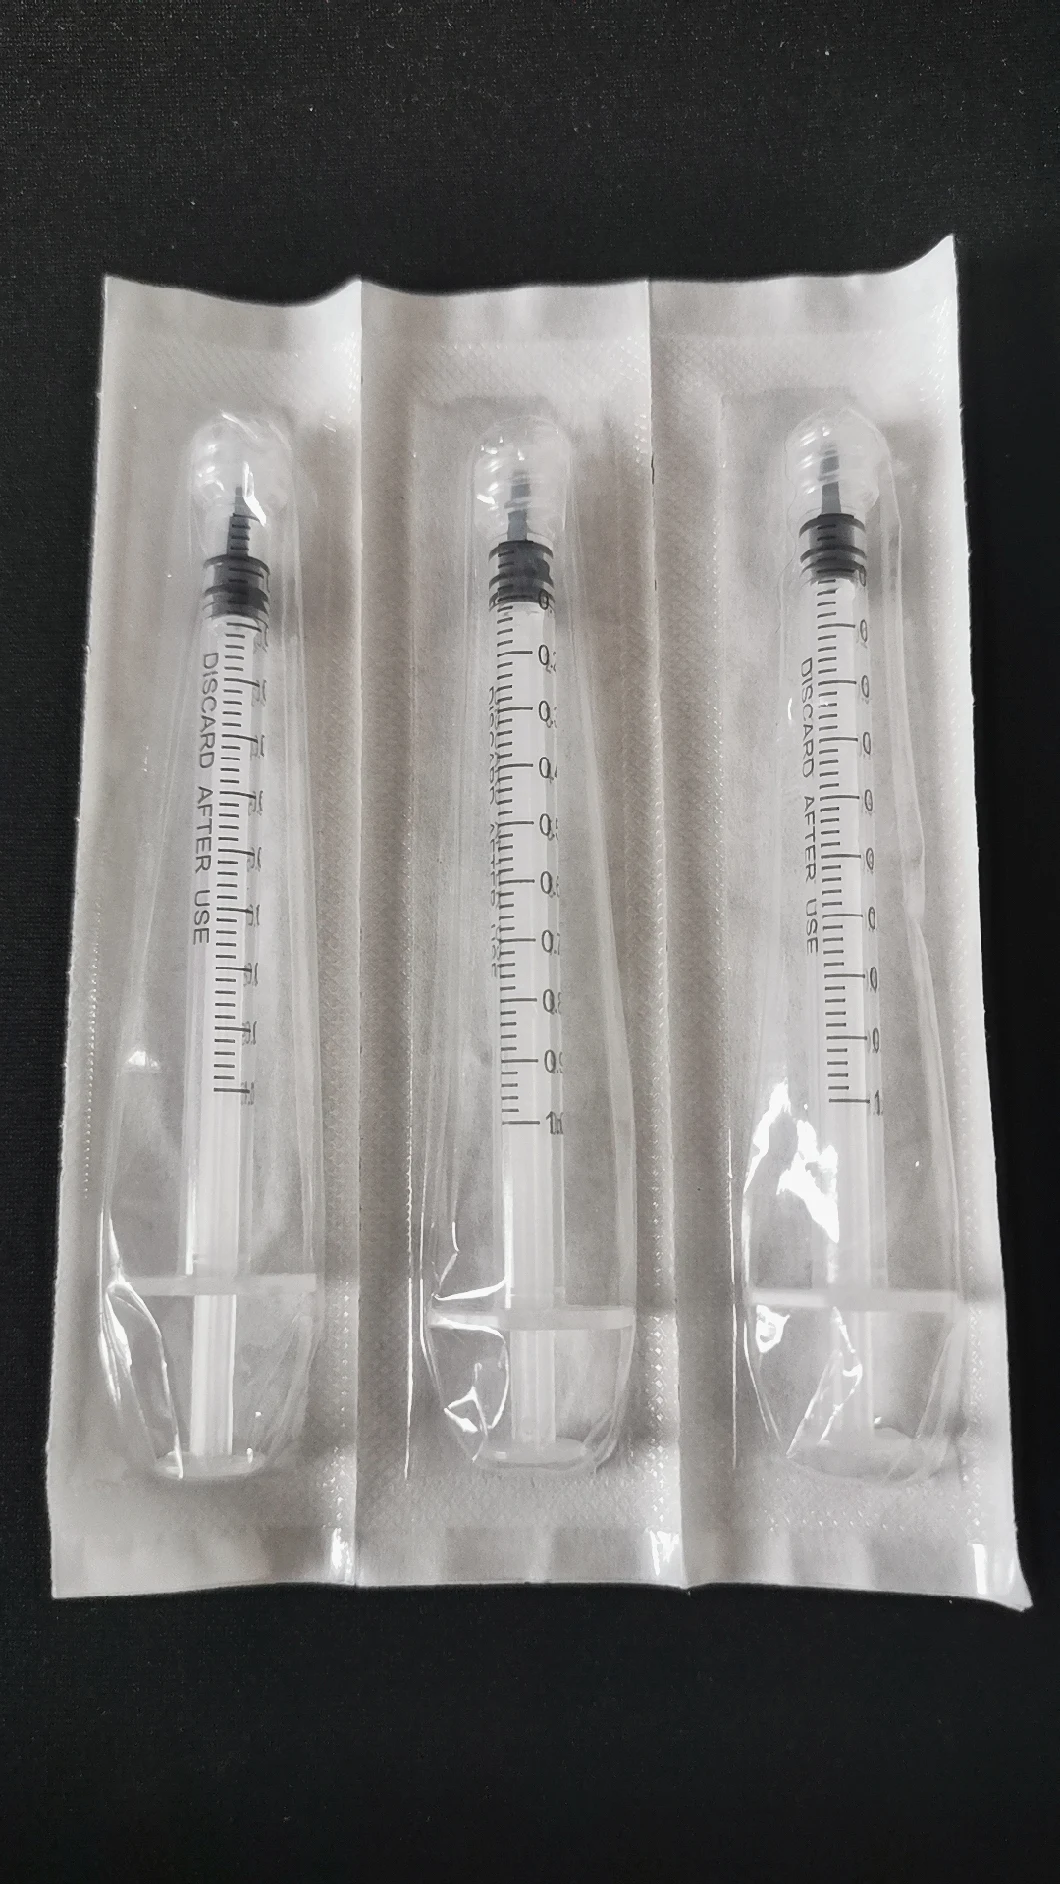 Safety Needles, Safety Cap Syringes, Safety Retractable Syringes, Safety Scalp Vein Sets, Safety Blood Collection Needles, Disposable Syringes, Filter Needles